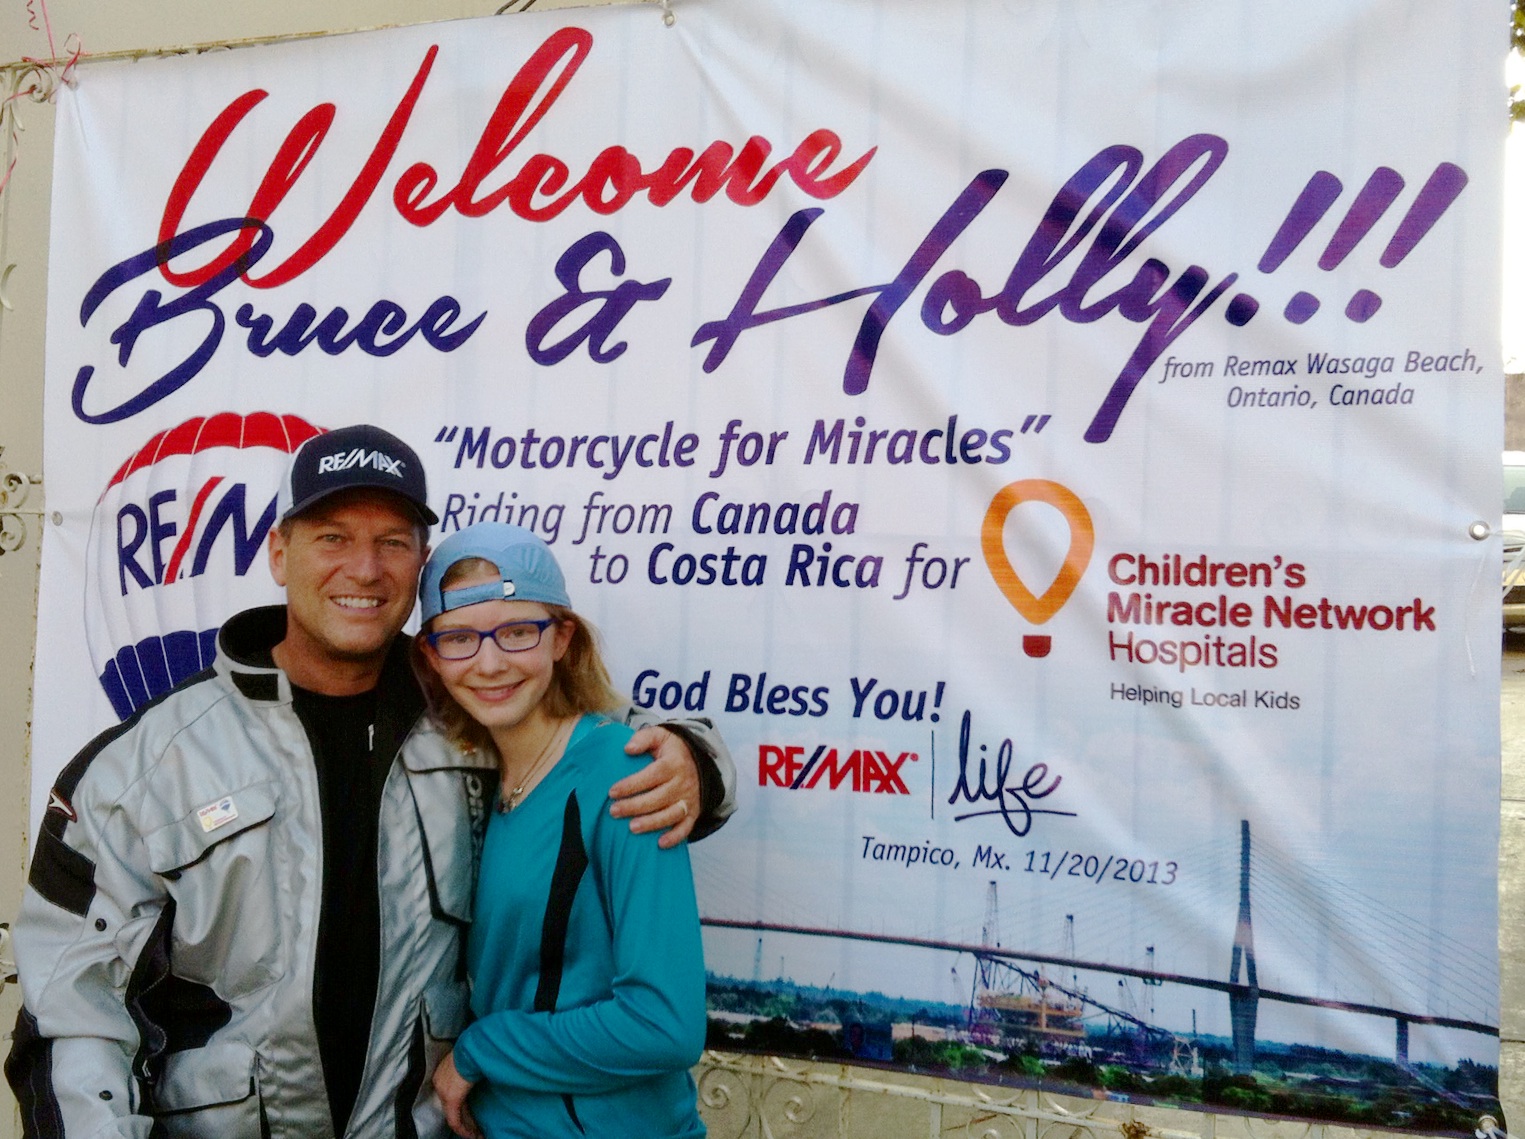 Motorcycle for Miracles riders Bruce and Holly were warmly welcomed in Tampico, Mexico